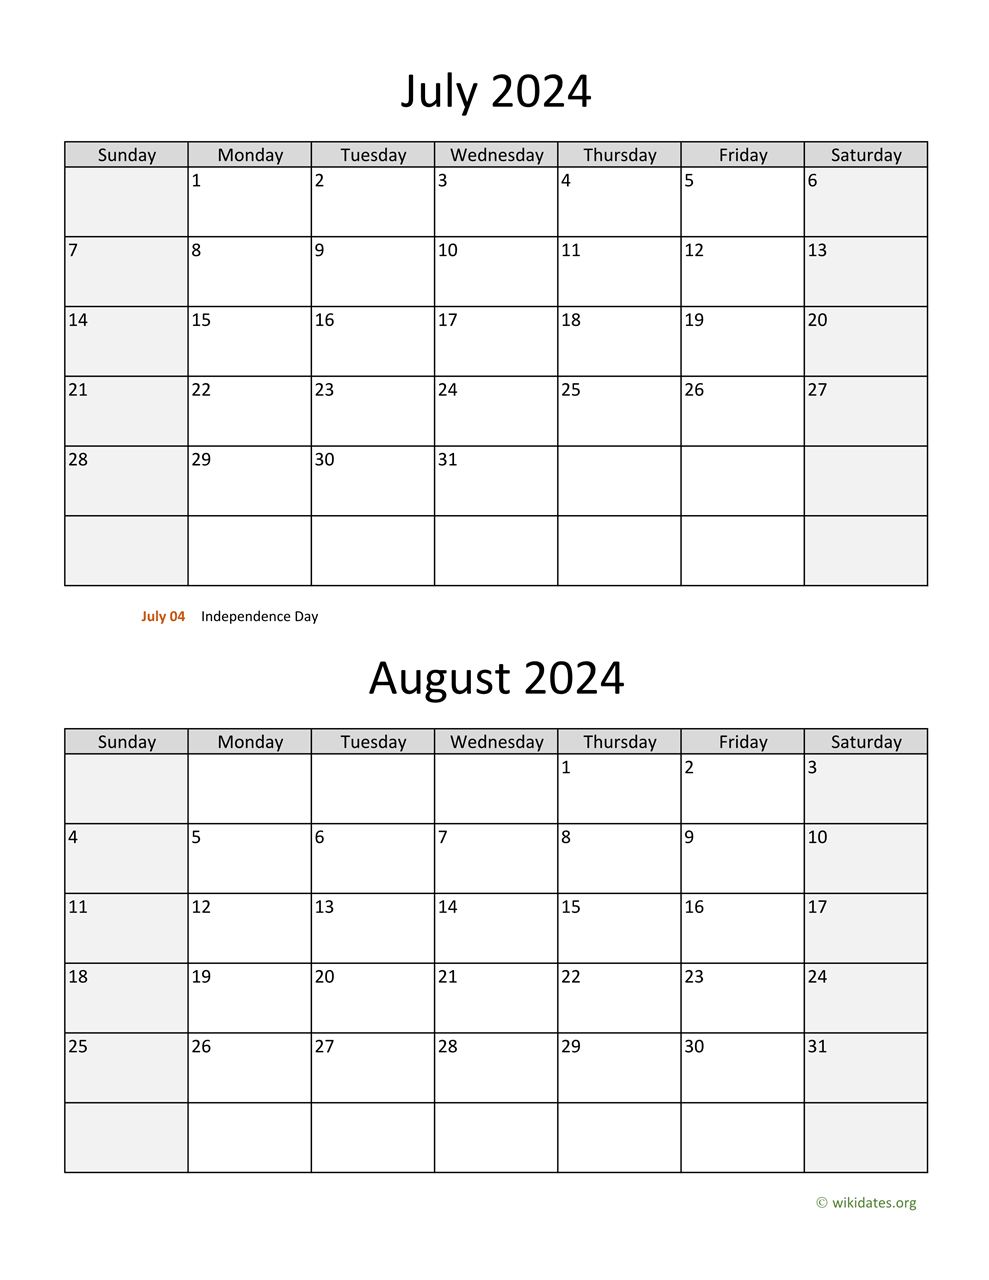 July And August 2024 Calendar | Wikidates for July And August 2024 Printable Calendar